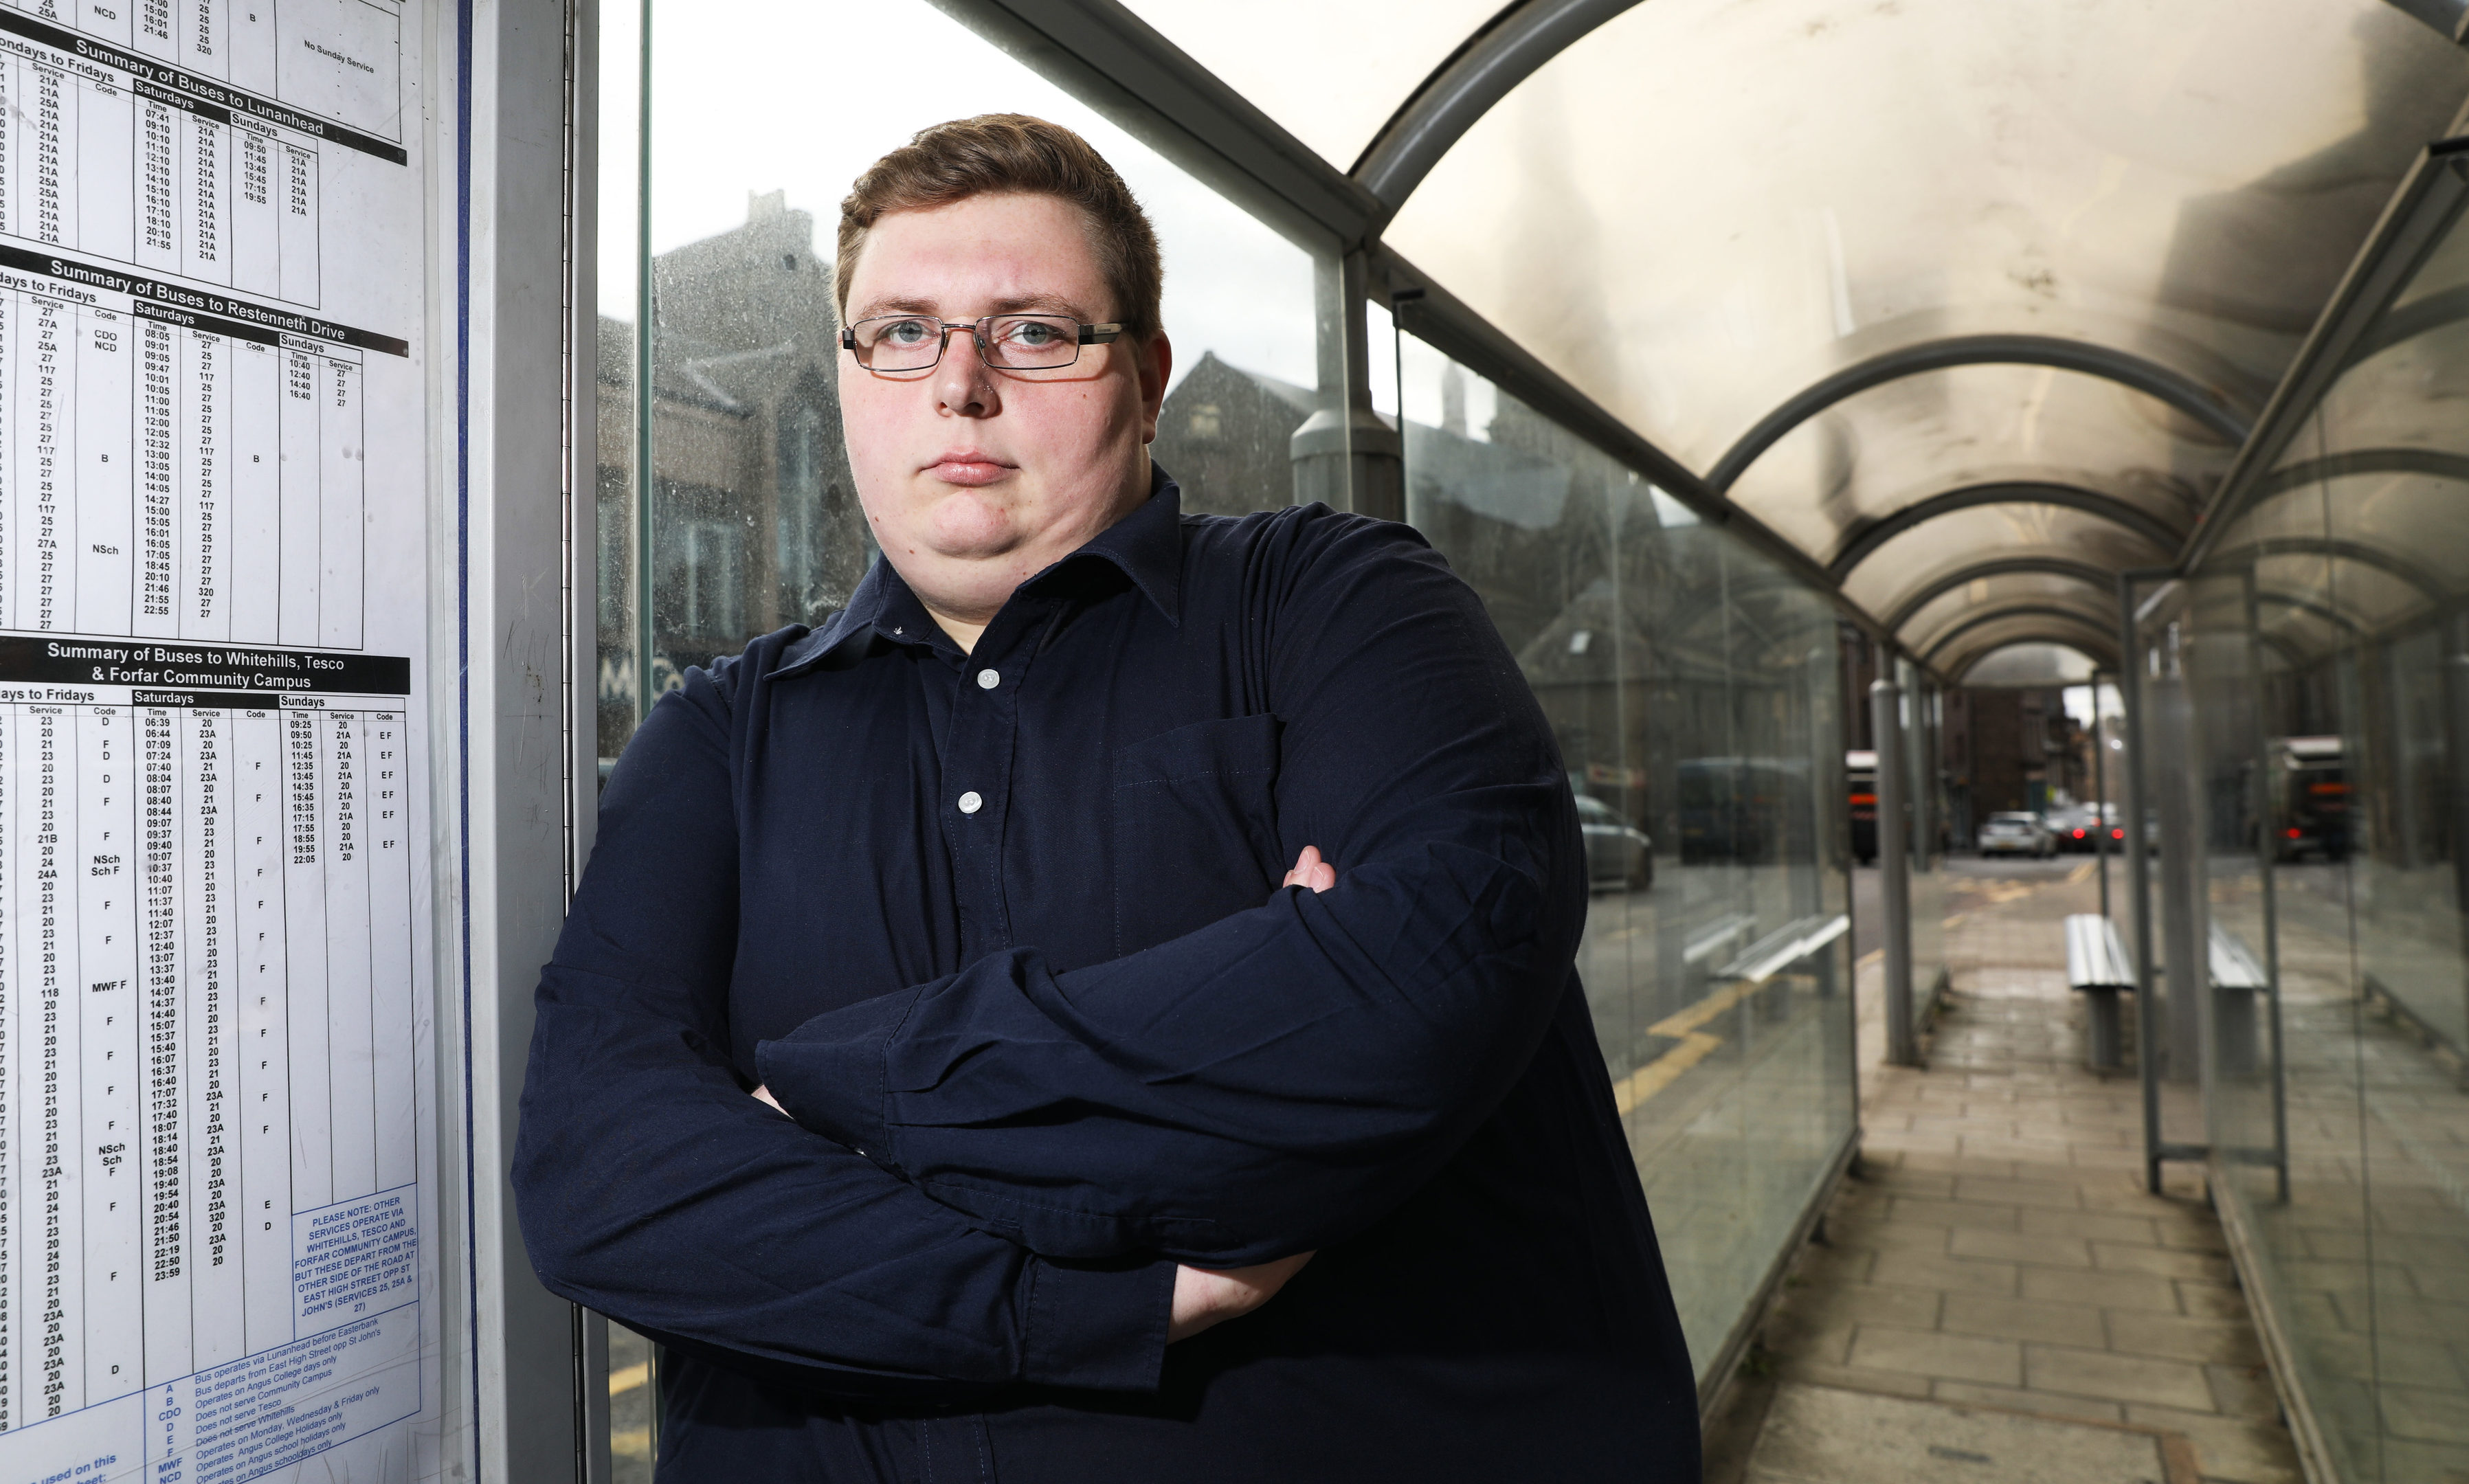 Scott Peter Lawson, 26, has reported problems with Stagecoach cuts "leaving students behind".